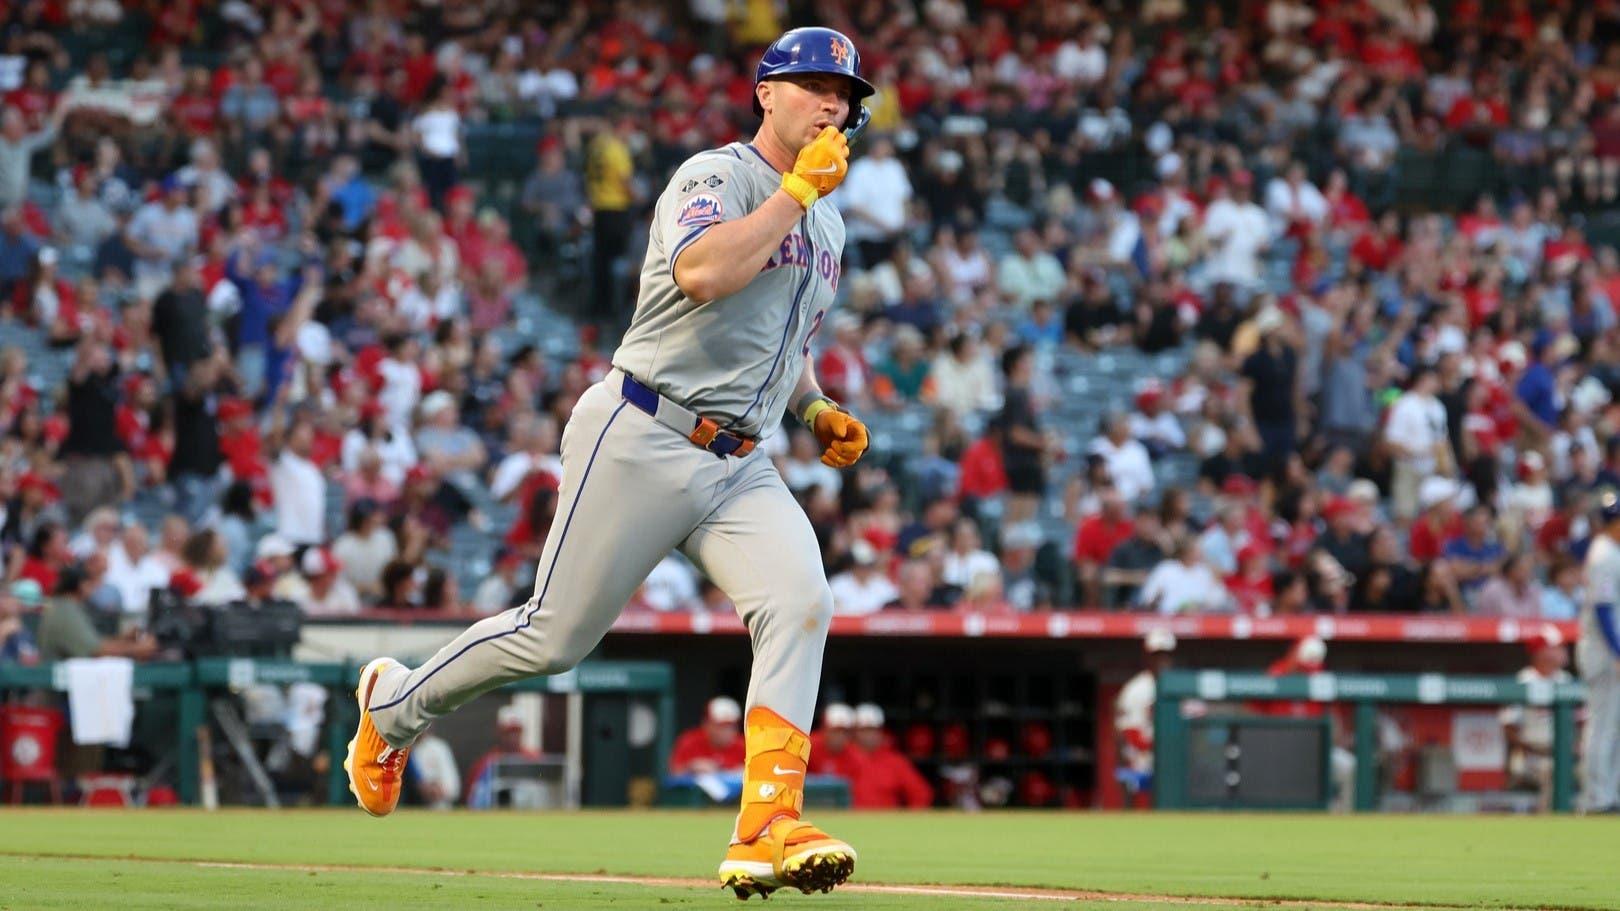 Mets start long road trip on right foot with 5-1 win over Angels